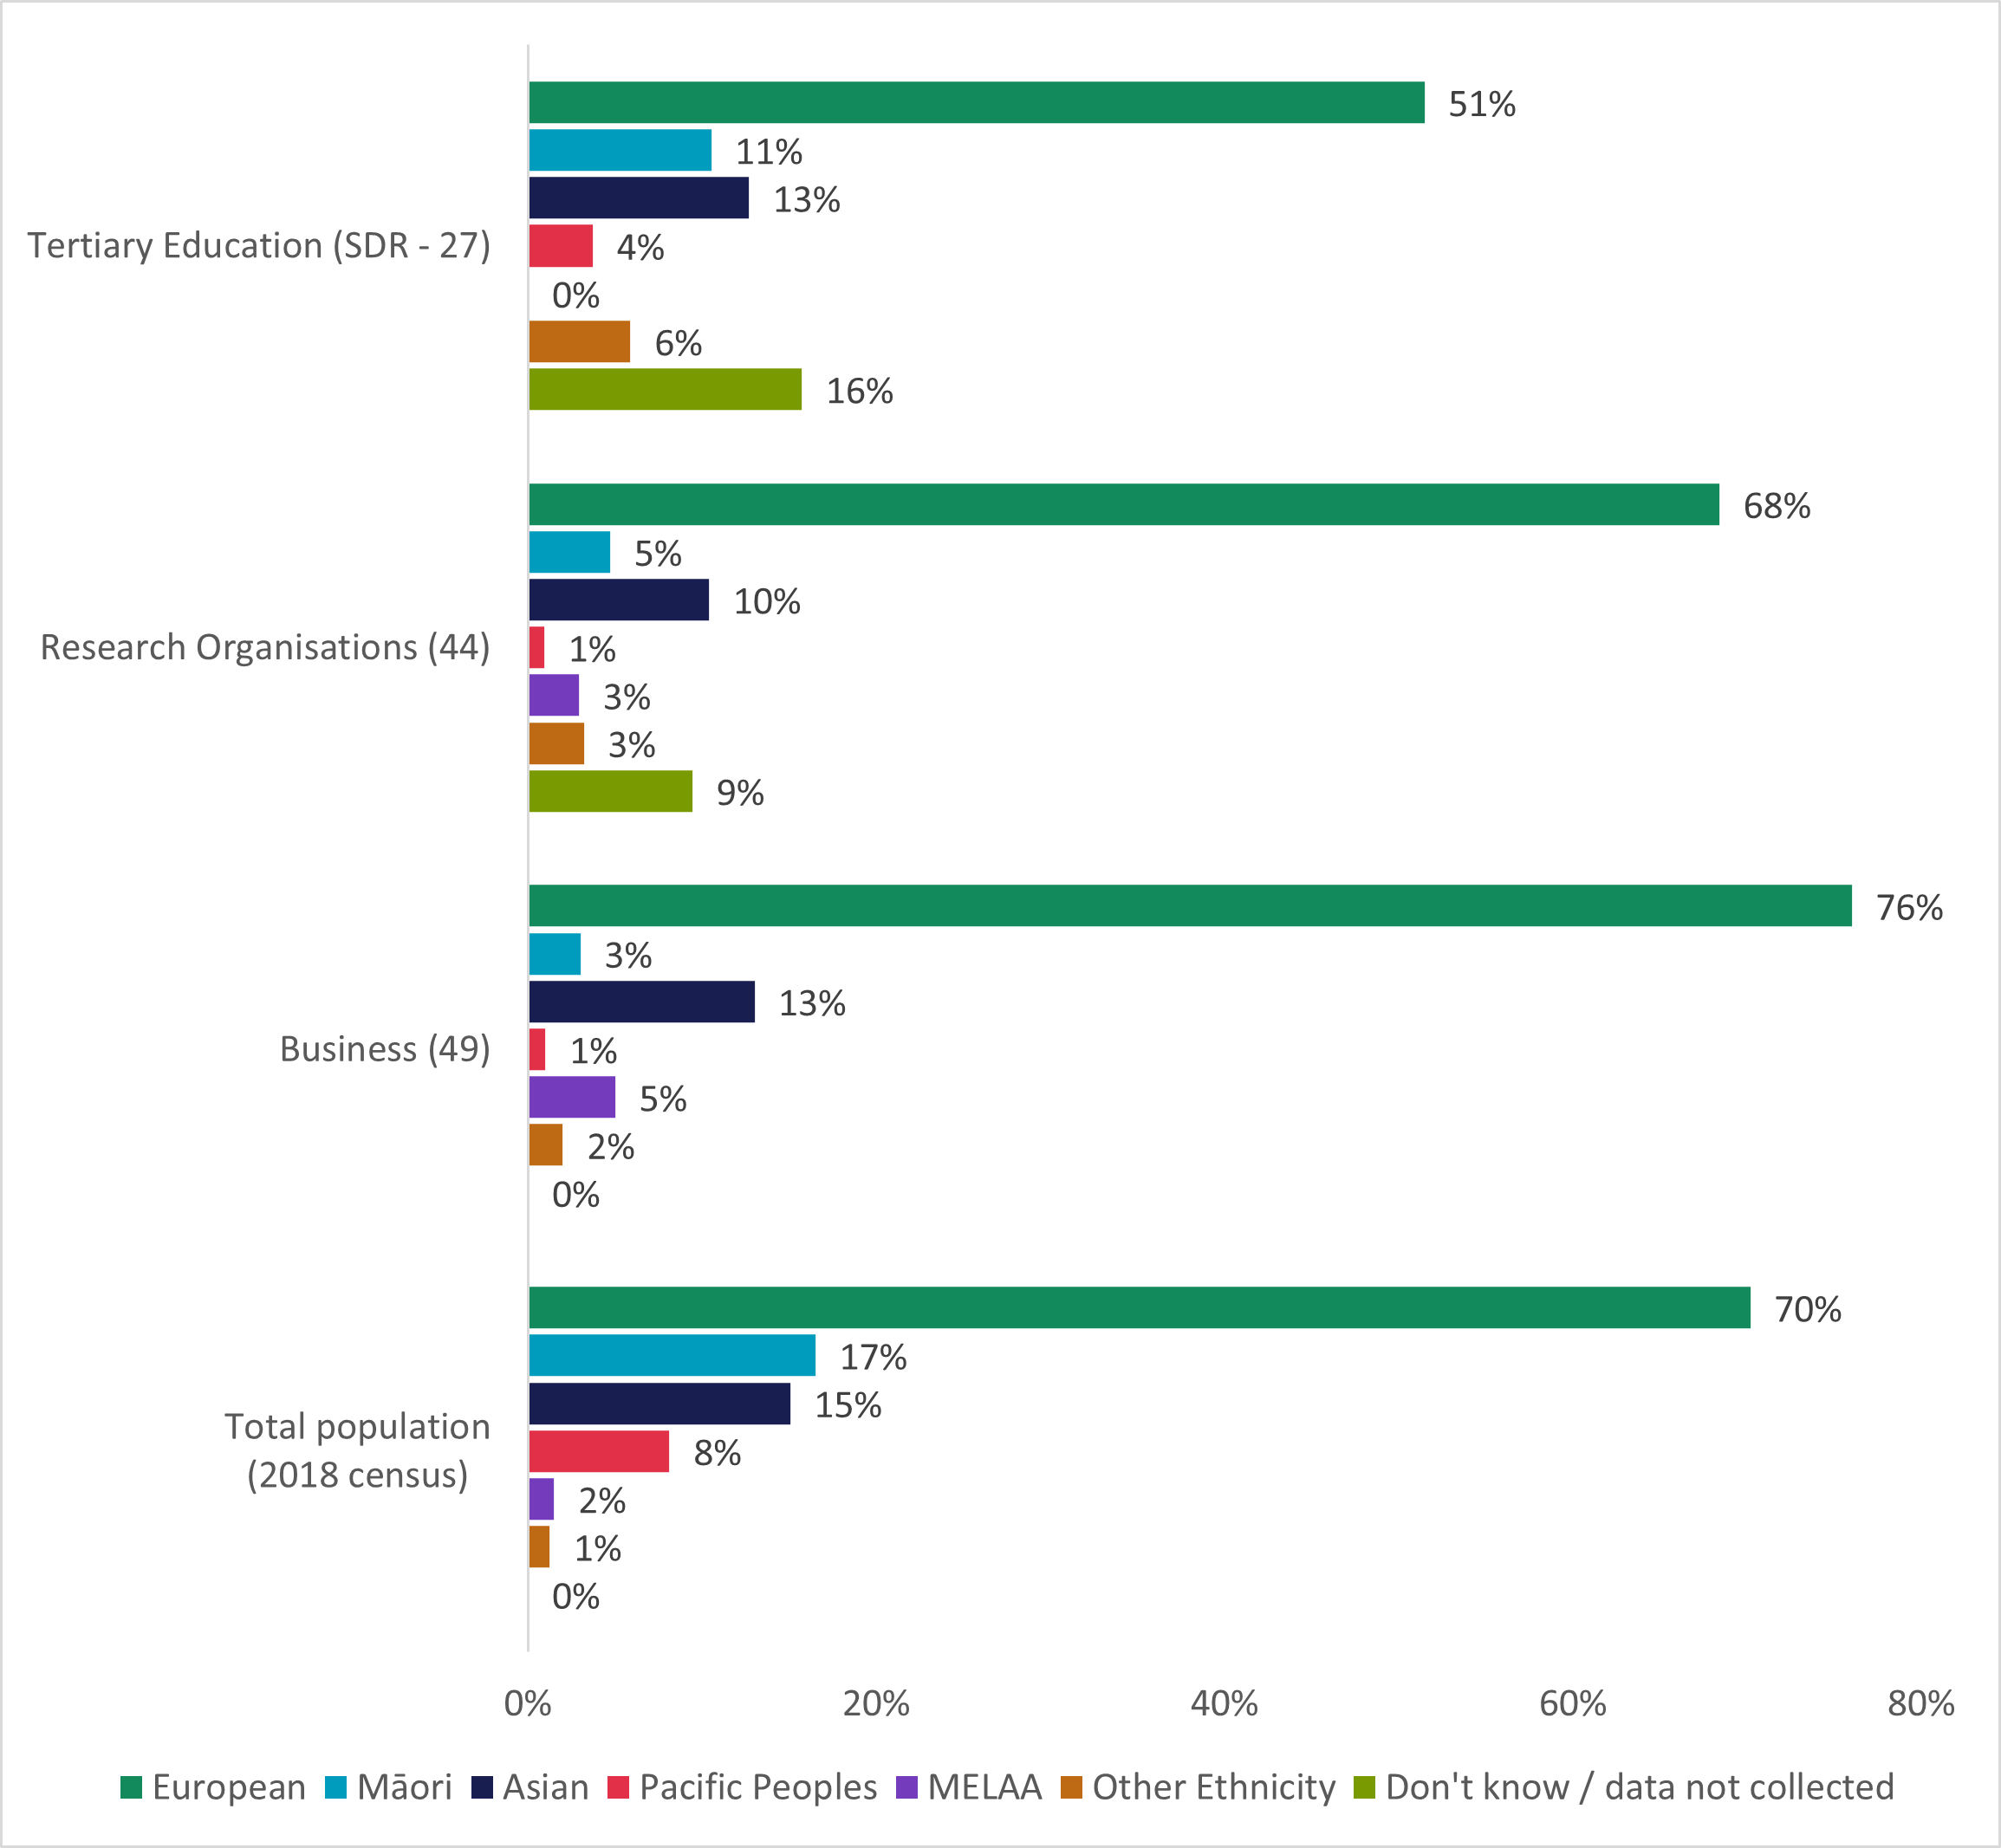 This figure is a clustered bar chart showing the ethnicity distribution of Research, Science and Innovation employees by organisation type. The chart has 4 clusters representing each organisation type (Tertiary Education, Research Organisations, Business, Total population - 2018 census). Each cluster has 7 bars representing each ethnicity (European, Maori, Asian, Pacific Peoples, MELAA, Other Ethnicity, Don't know/data not collected). The X axis shows the percentage of each ethnicity, and the Y axis shows the organisation type. There is a key at the bottom of the chart showing the 7 ethnicity response options.